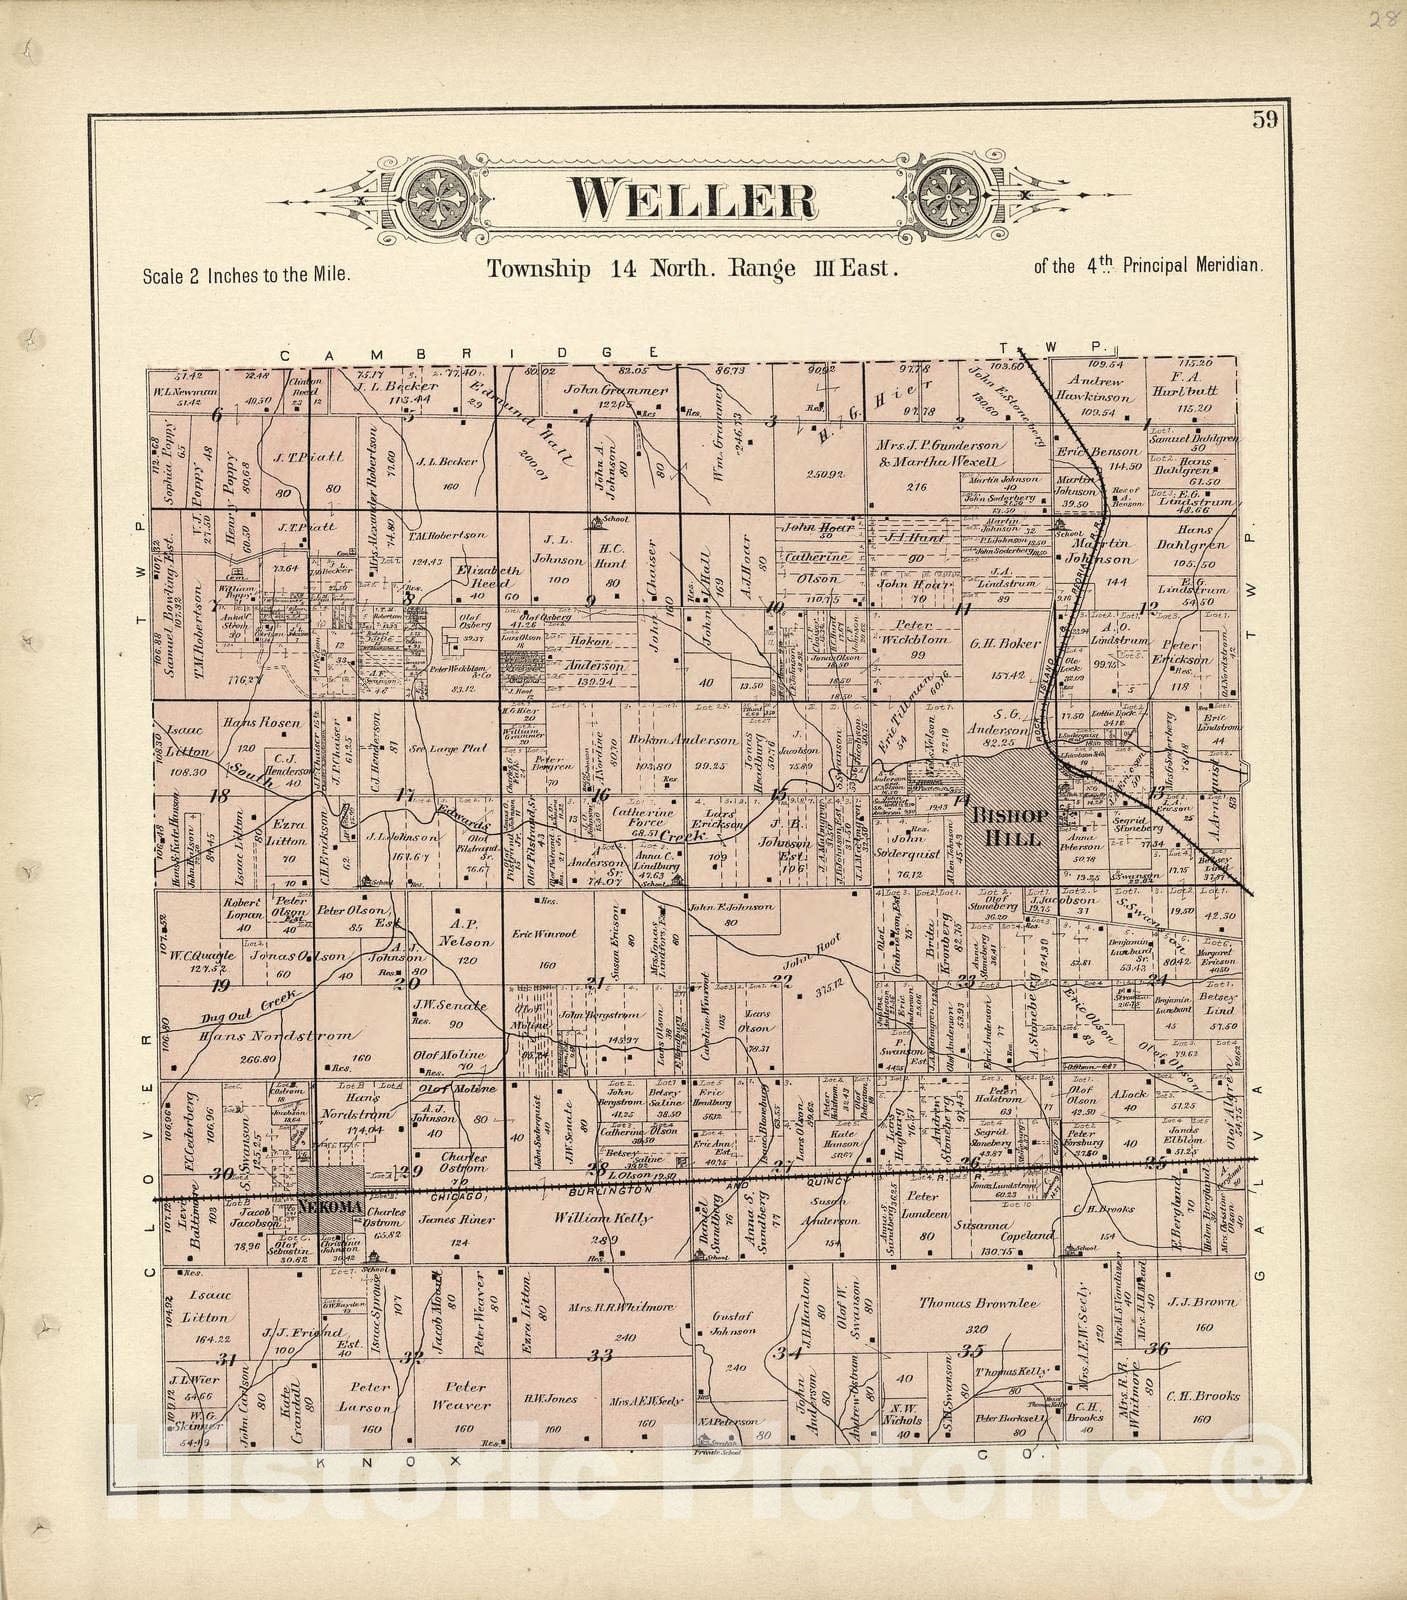 Historic 1893 Map - Plat Book of Henry County, Illinois - Weller